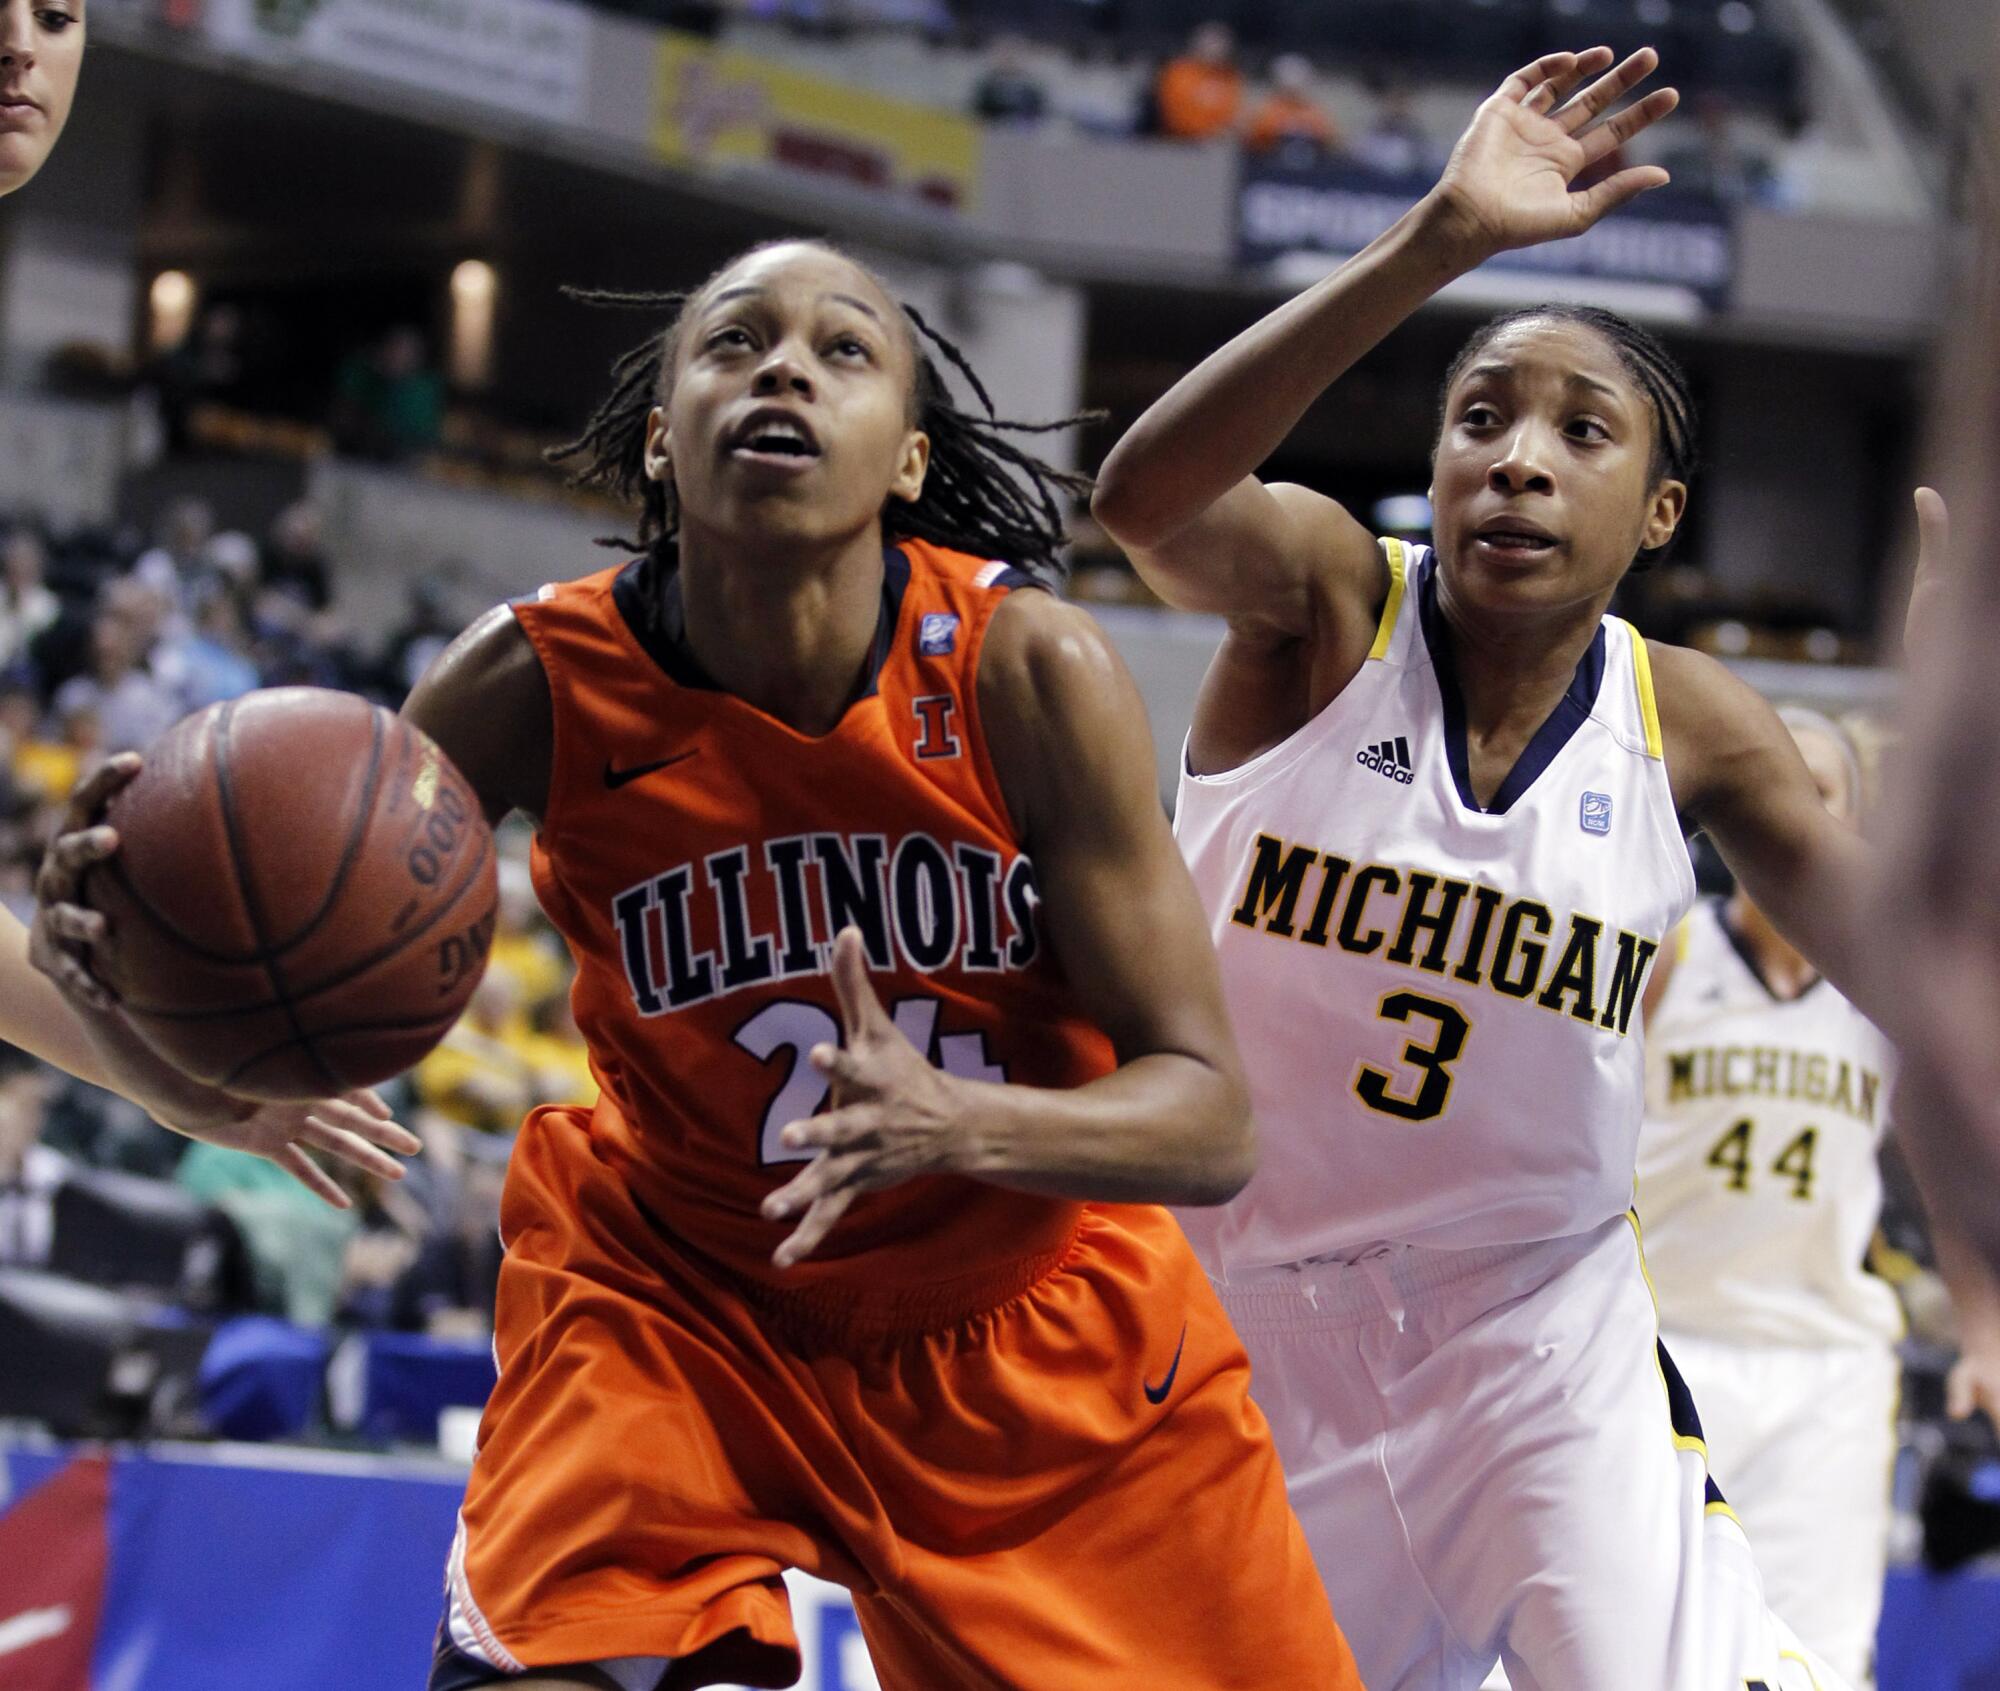 Illinois guard Adrienne Godbold, left, grabs a rebound and looks to shoot as Michigan guard Veronica Hicks defends